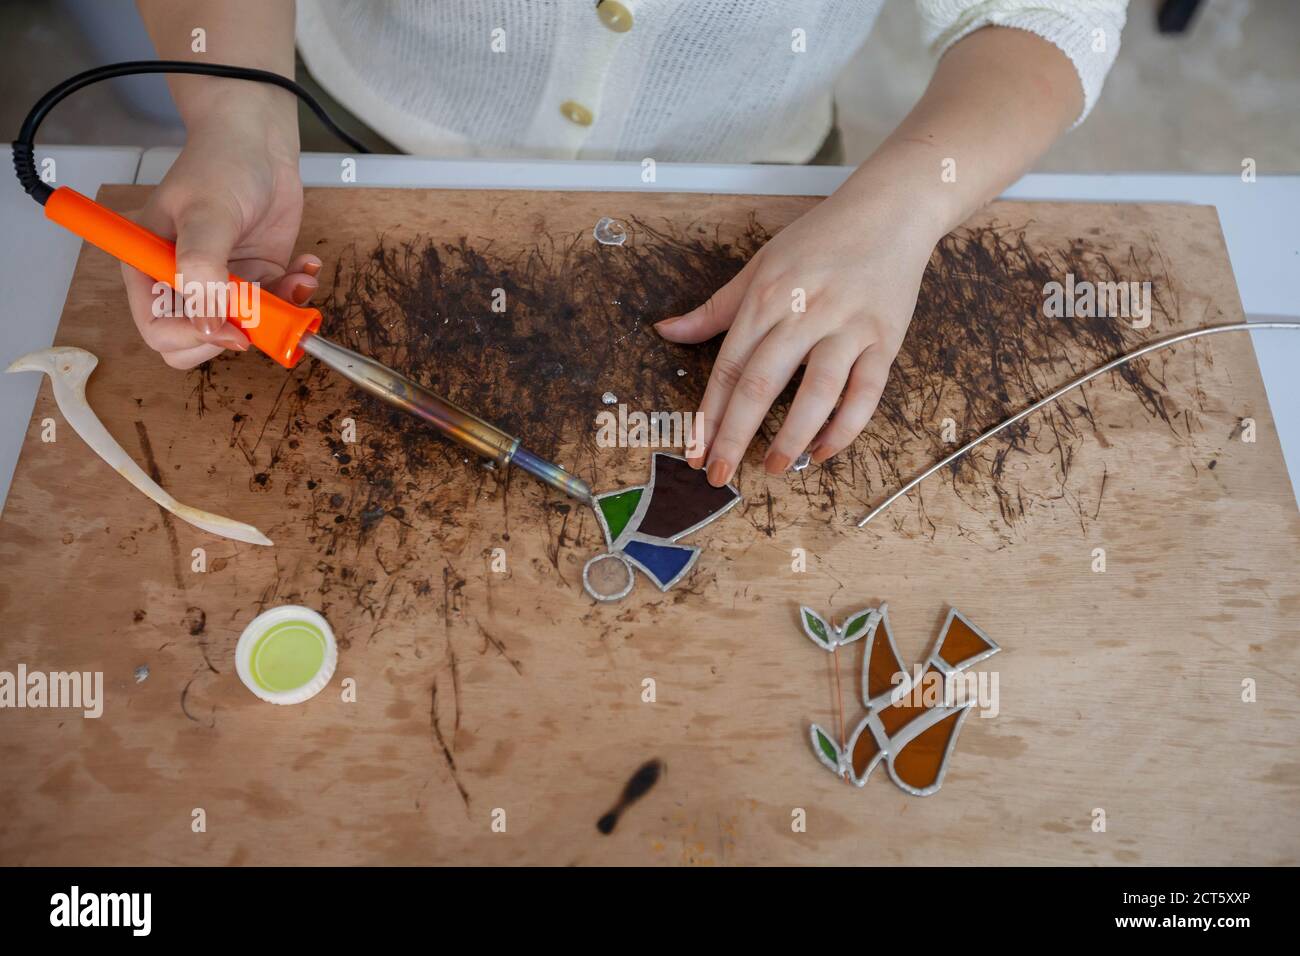 Bethlehem, West Bank city of Bethlehem. 21st Sep, 2020. Palestinian artist Dalia Murra, 27, works on stained glass artworks at her workshop in the West Bank city of Bethlehem, Sept. 21, 2020. Credit: Luay Sababa/Xinhua/Alamy Live News Stock Photo